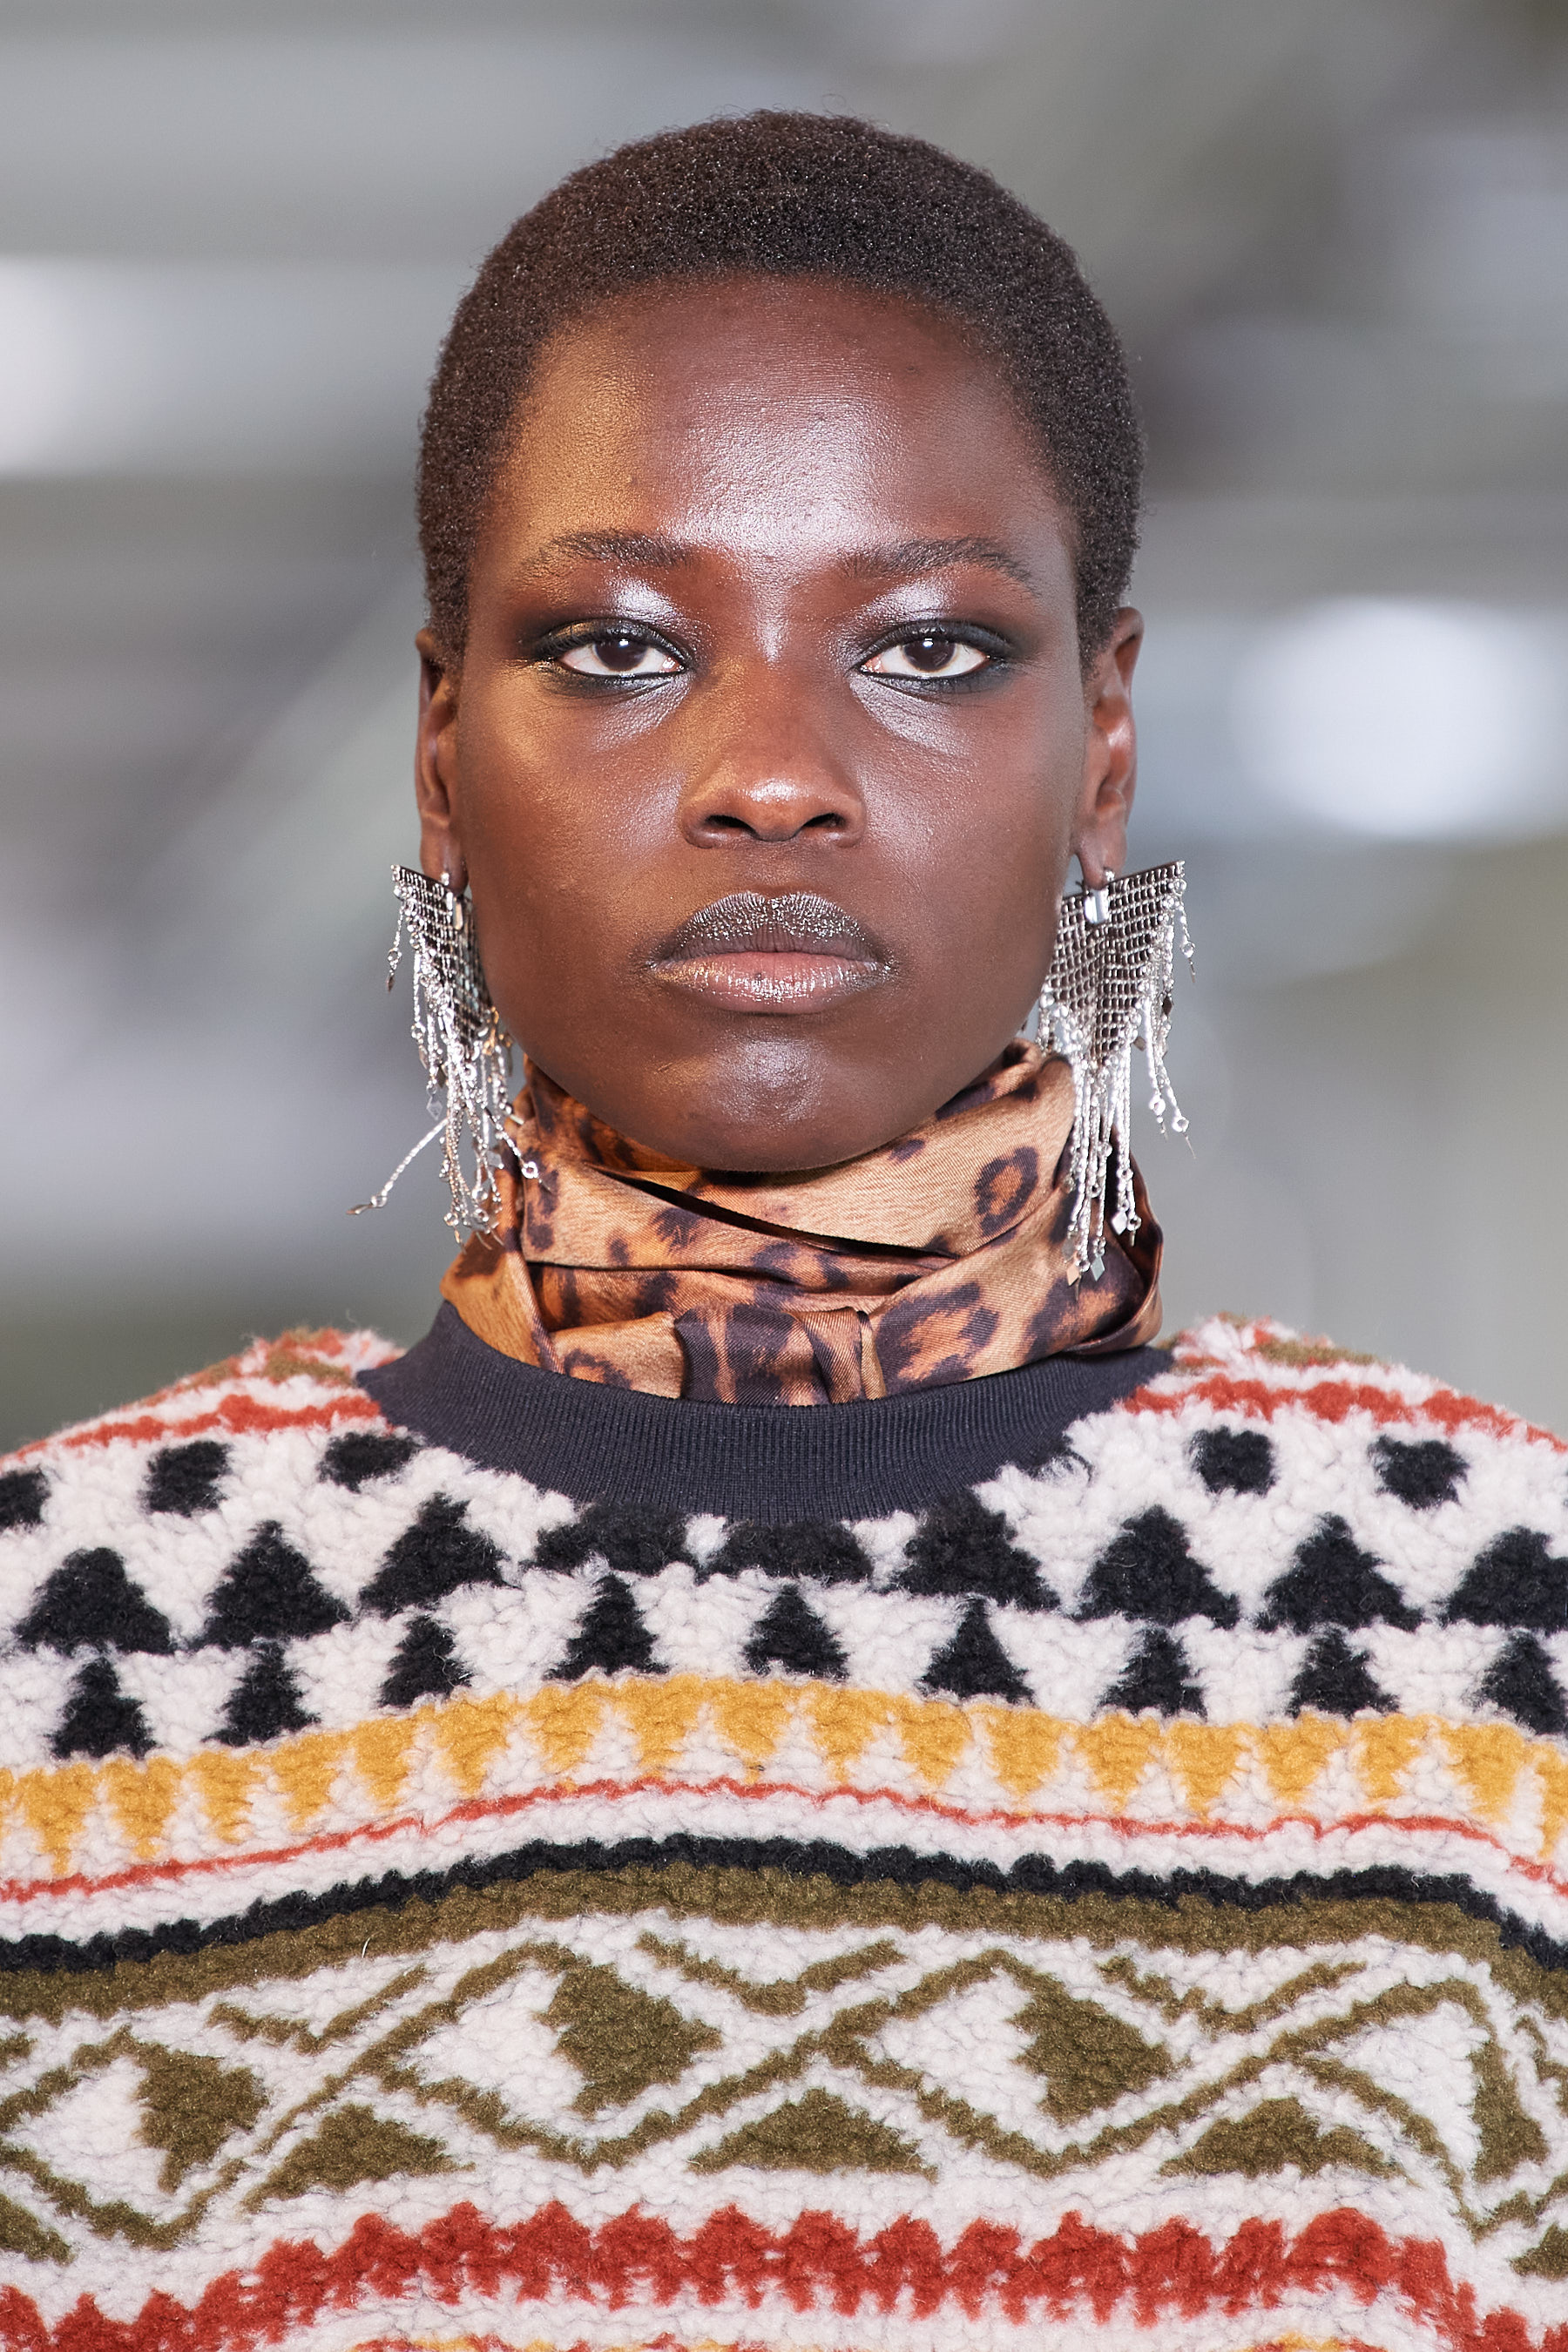 Etro Fall 2021 Details | The Impression